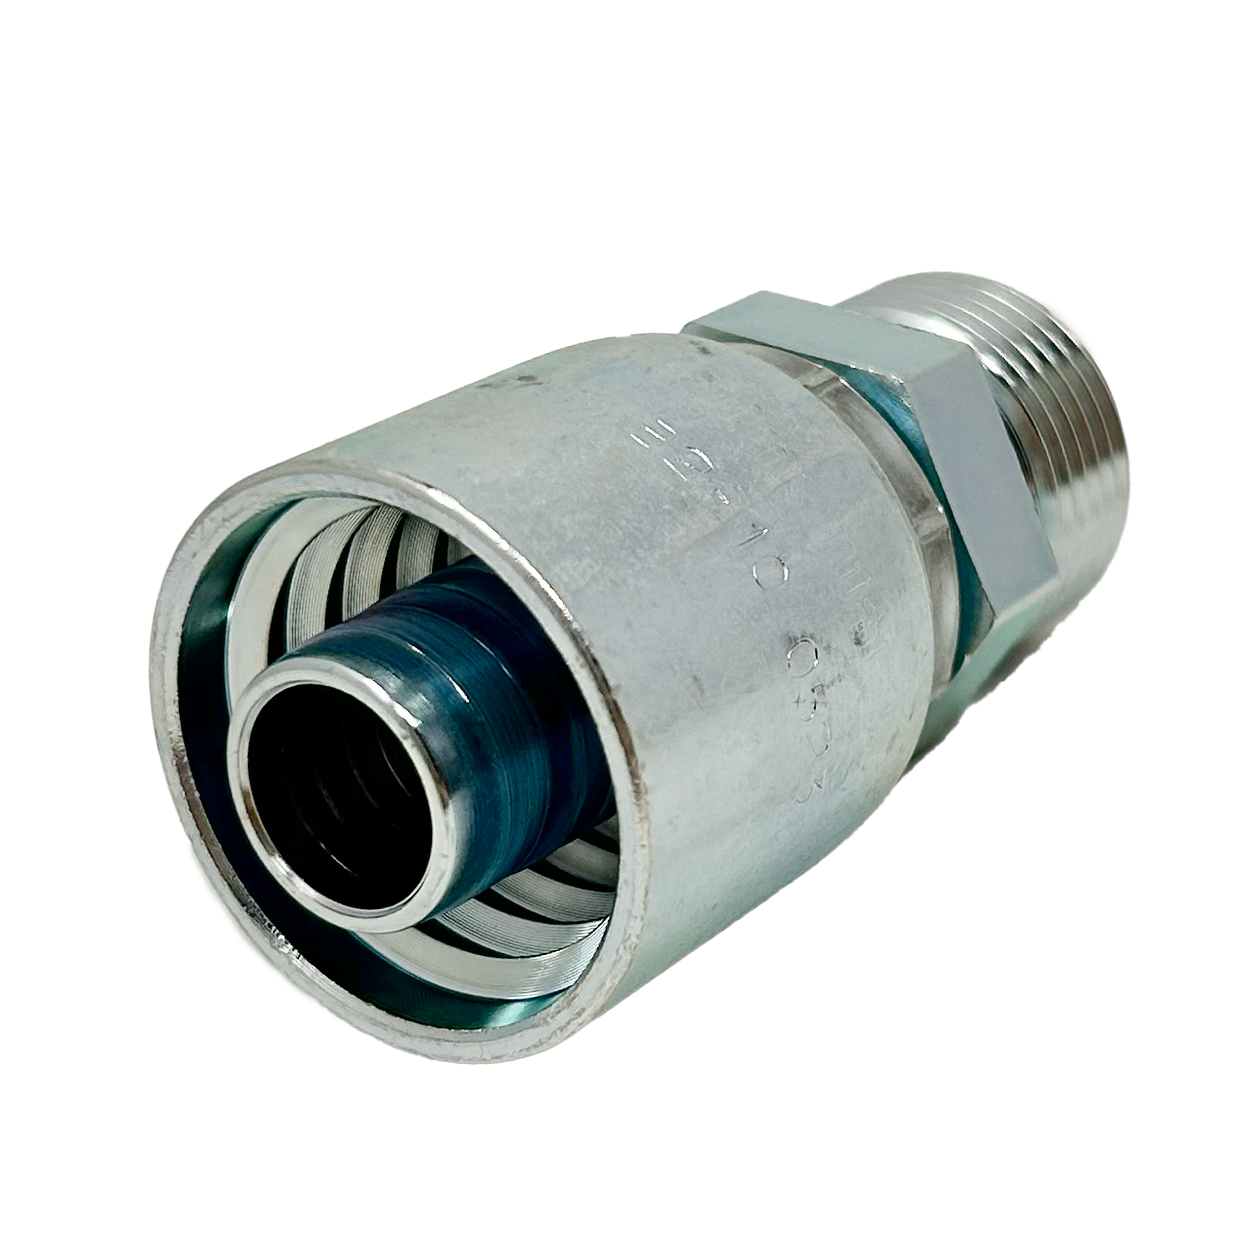 B2-OFM-1216: Continental Hose Fitting, 0.75 (3/4") Hose ID x 1-7/16-12 Male ORFS, Straight Rigid Connection